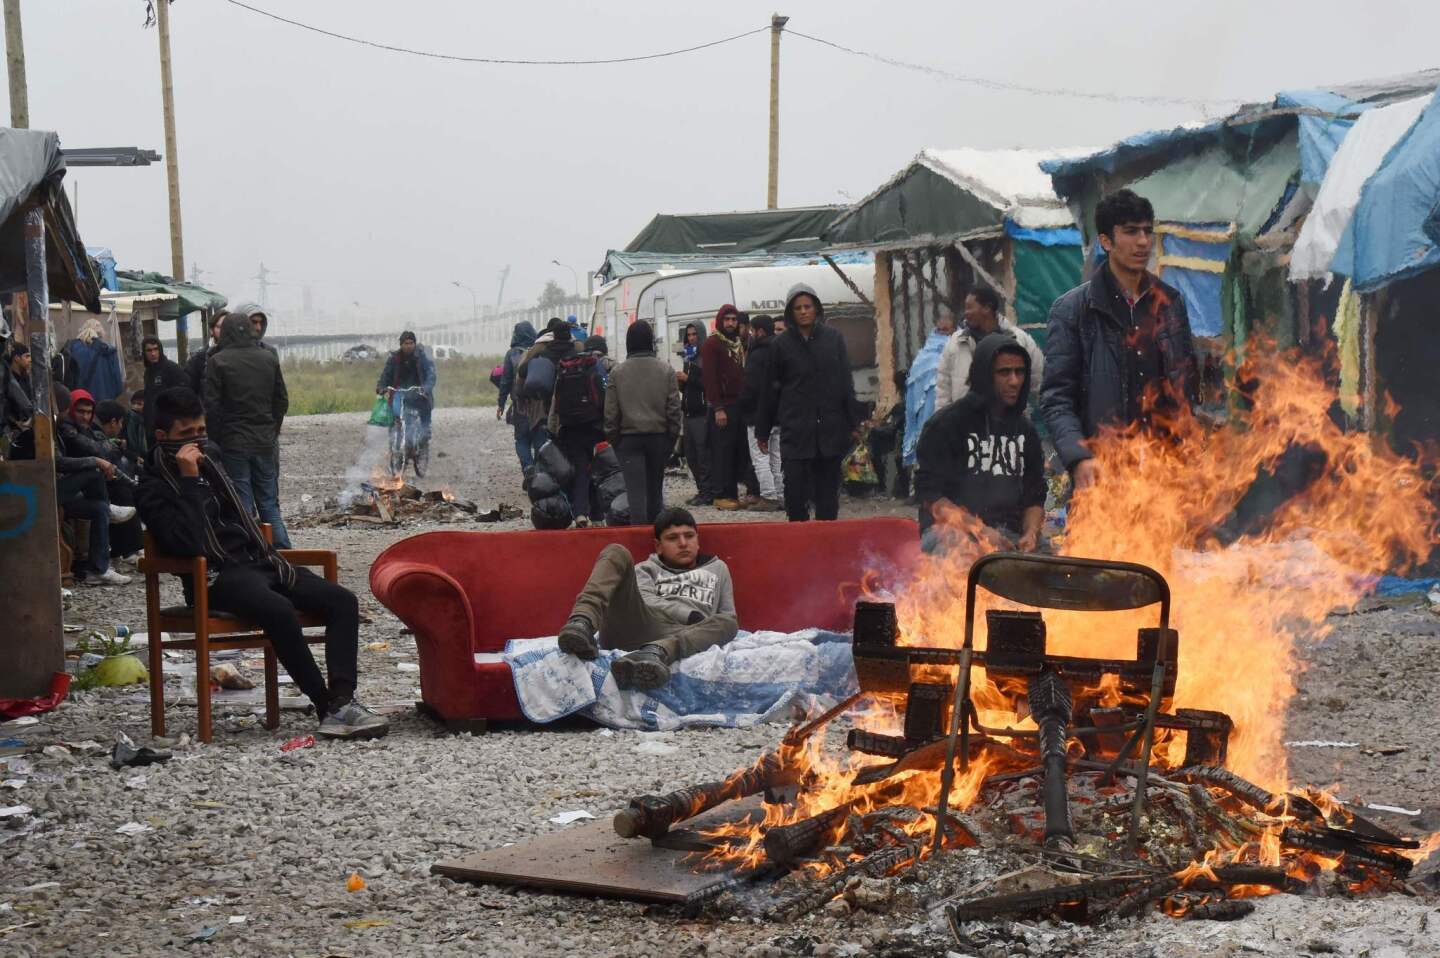 Migrants gather by their tents and a bonfire in a migrant camp known as "the Jungle," in Calais, France, before an operation to clear the camp of its estimated 6,000 to 8,000 occupants.